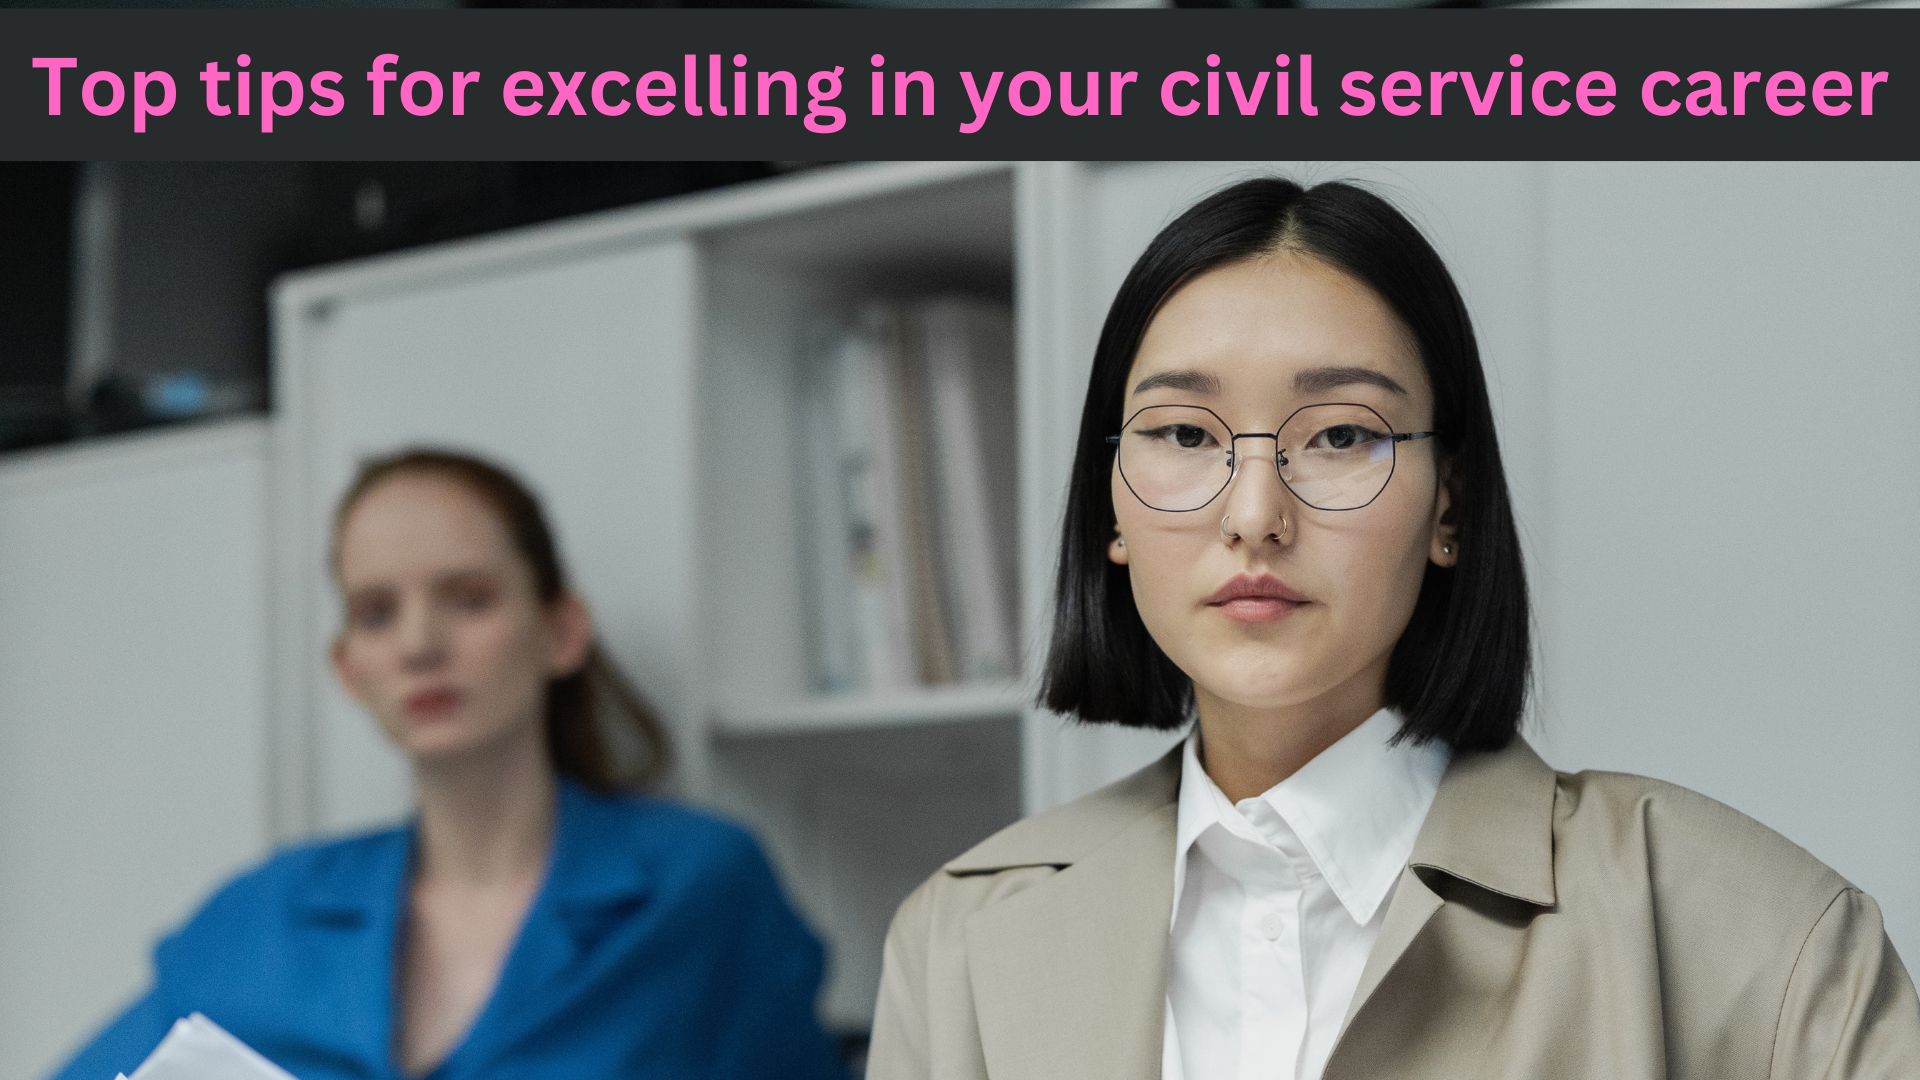 Top tips for excelling in your civil service career